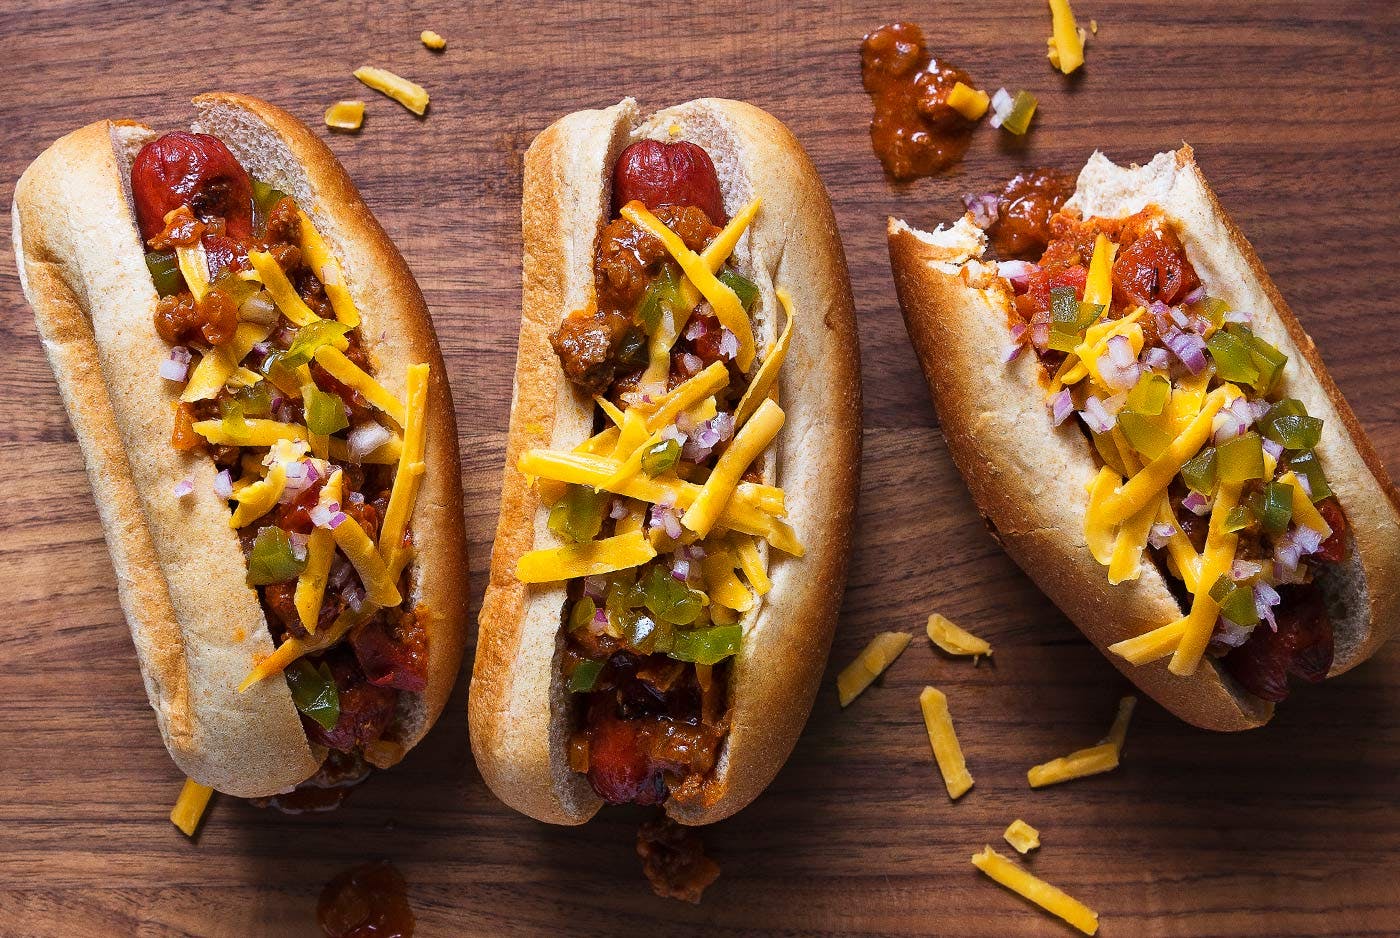 Eat at This 20-Course Buffet and We’ll Reveal What People Like About You Cheesy hot dog